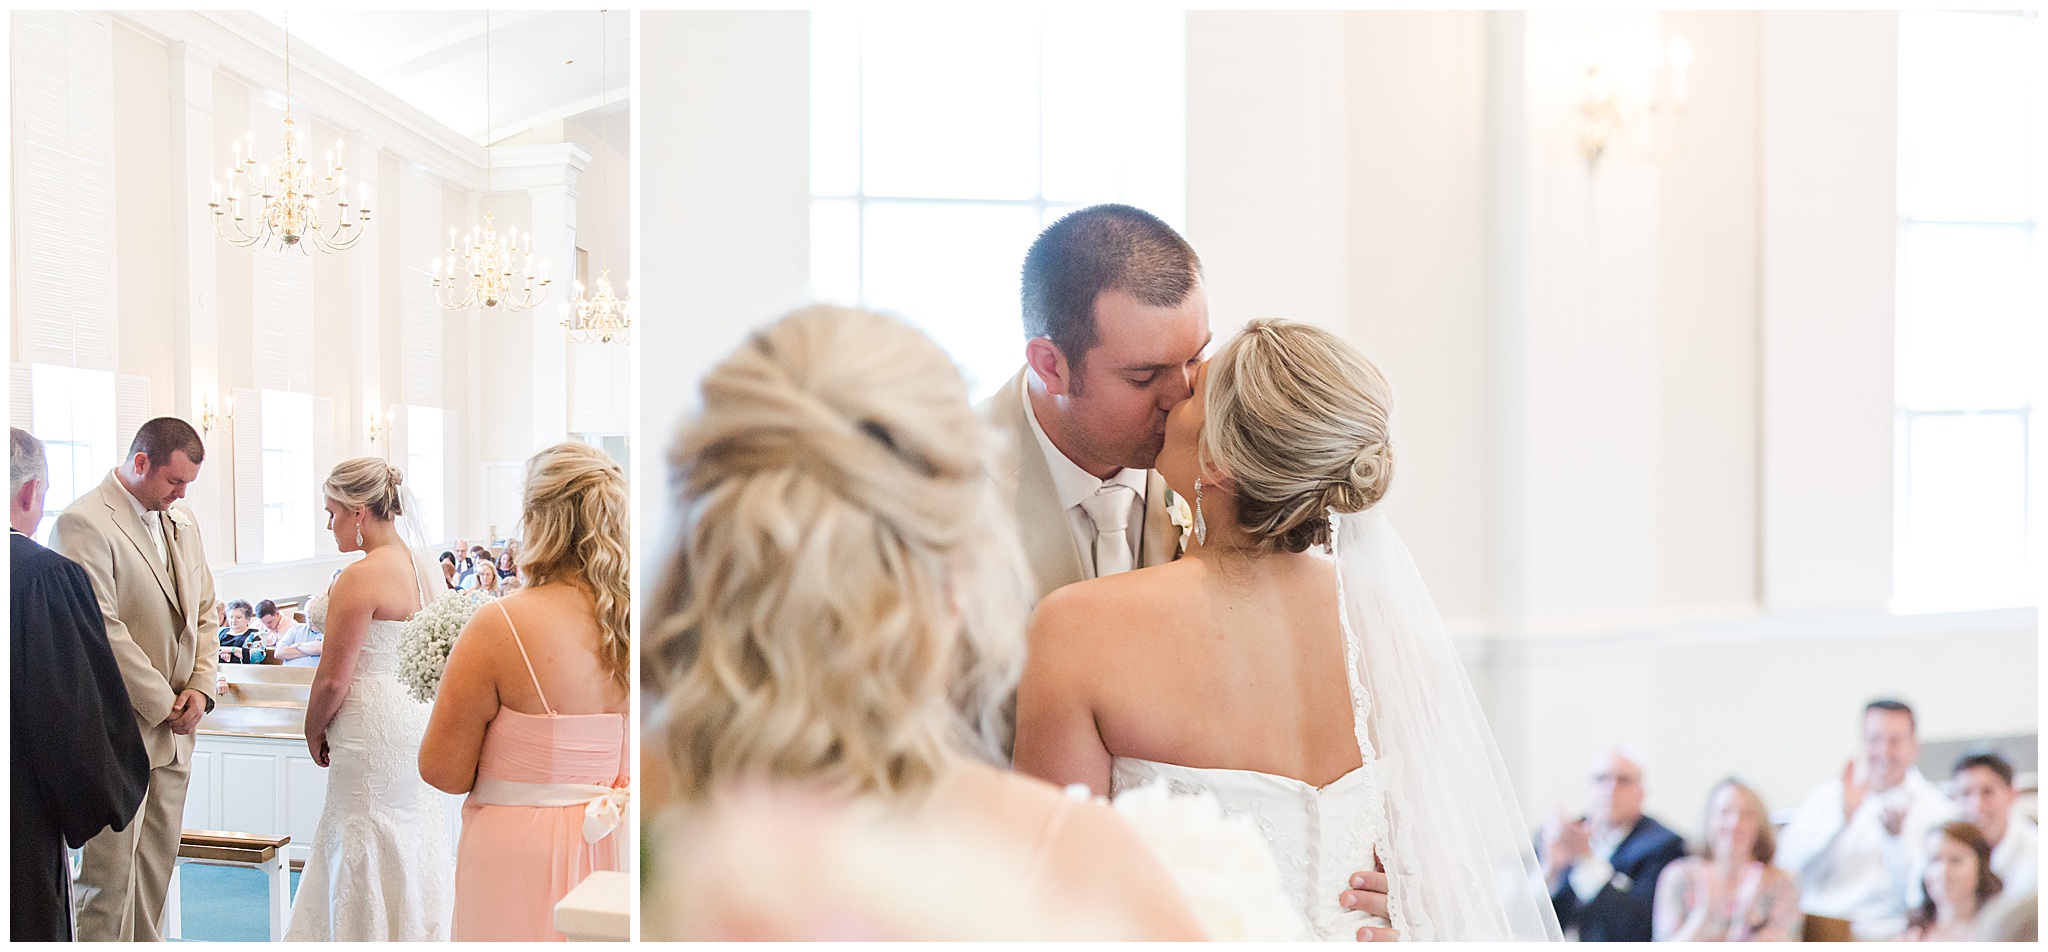 defining my story and part of my why with hypimages wedding photographer in charlotte nc